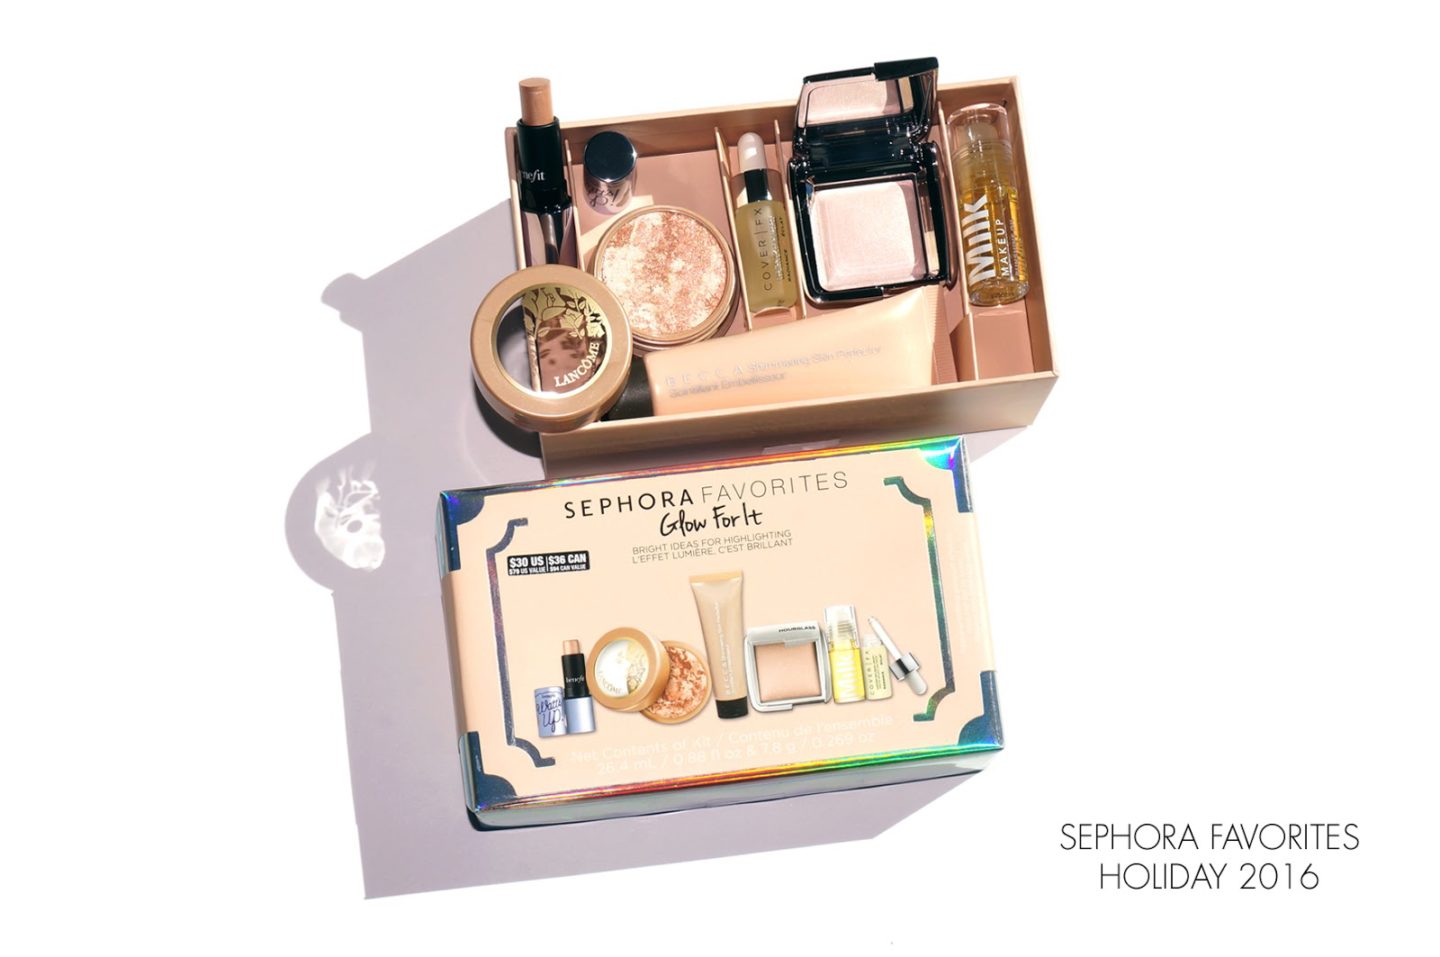 Sephora Favorites Glow For It - The Beauty Look Book